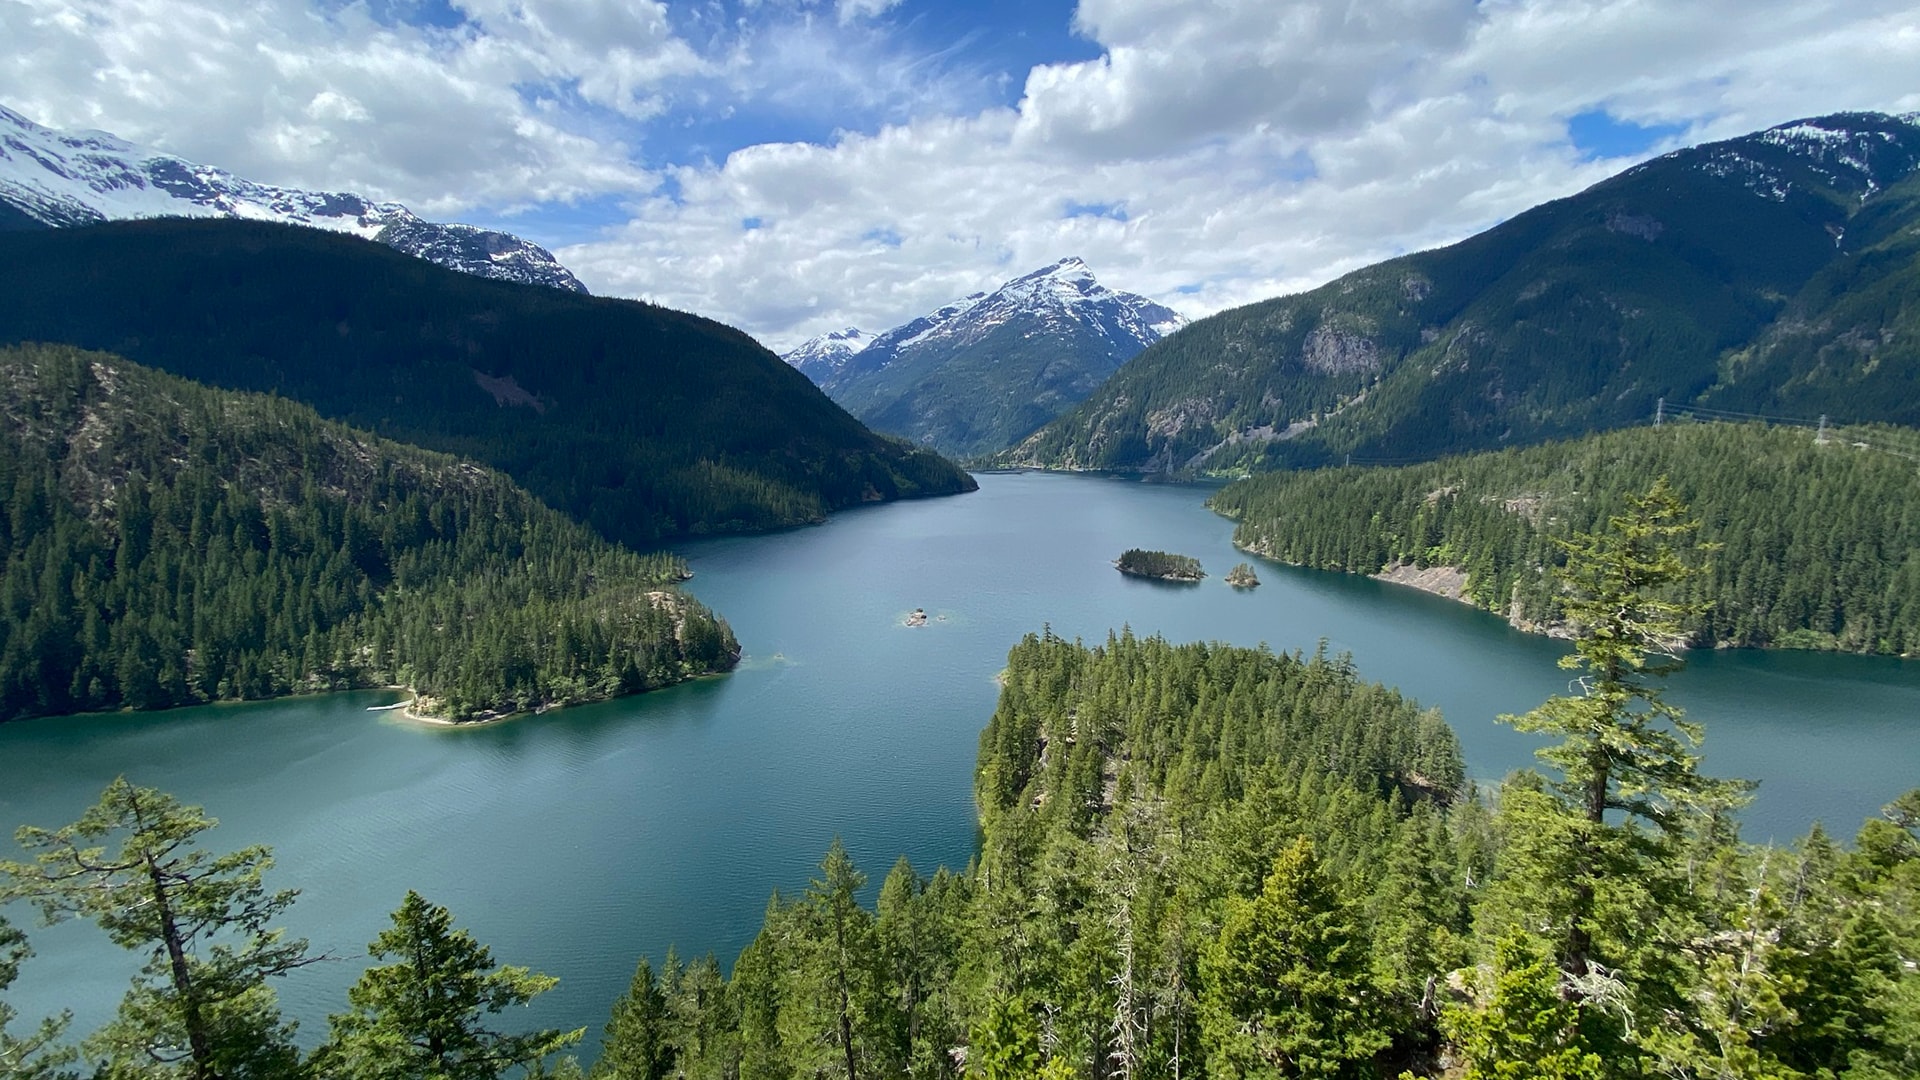 The Diablo Lake Overlook features stunning views of North Cascades National Park.